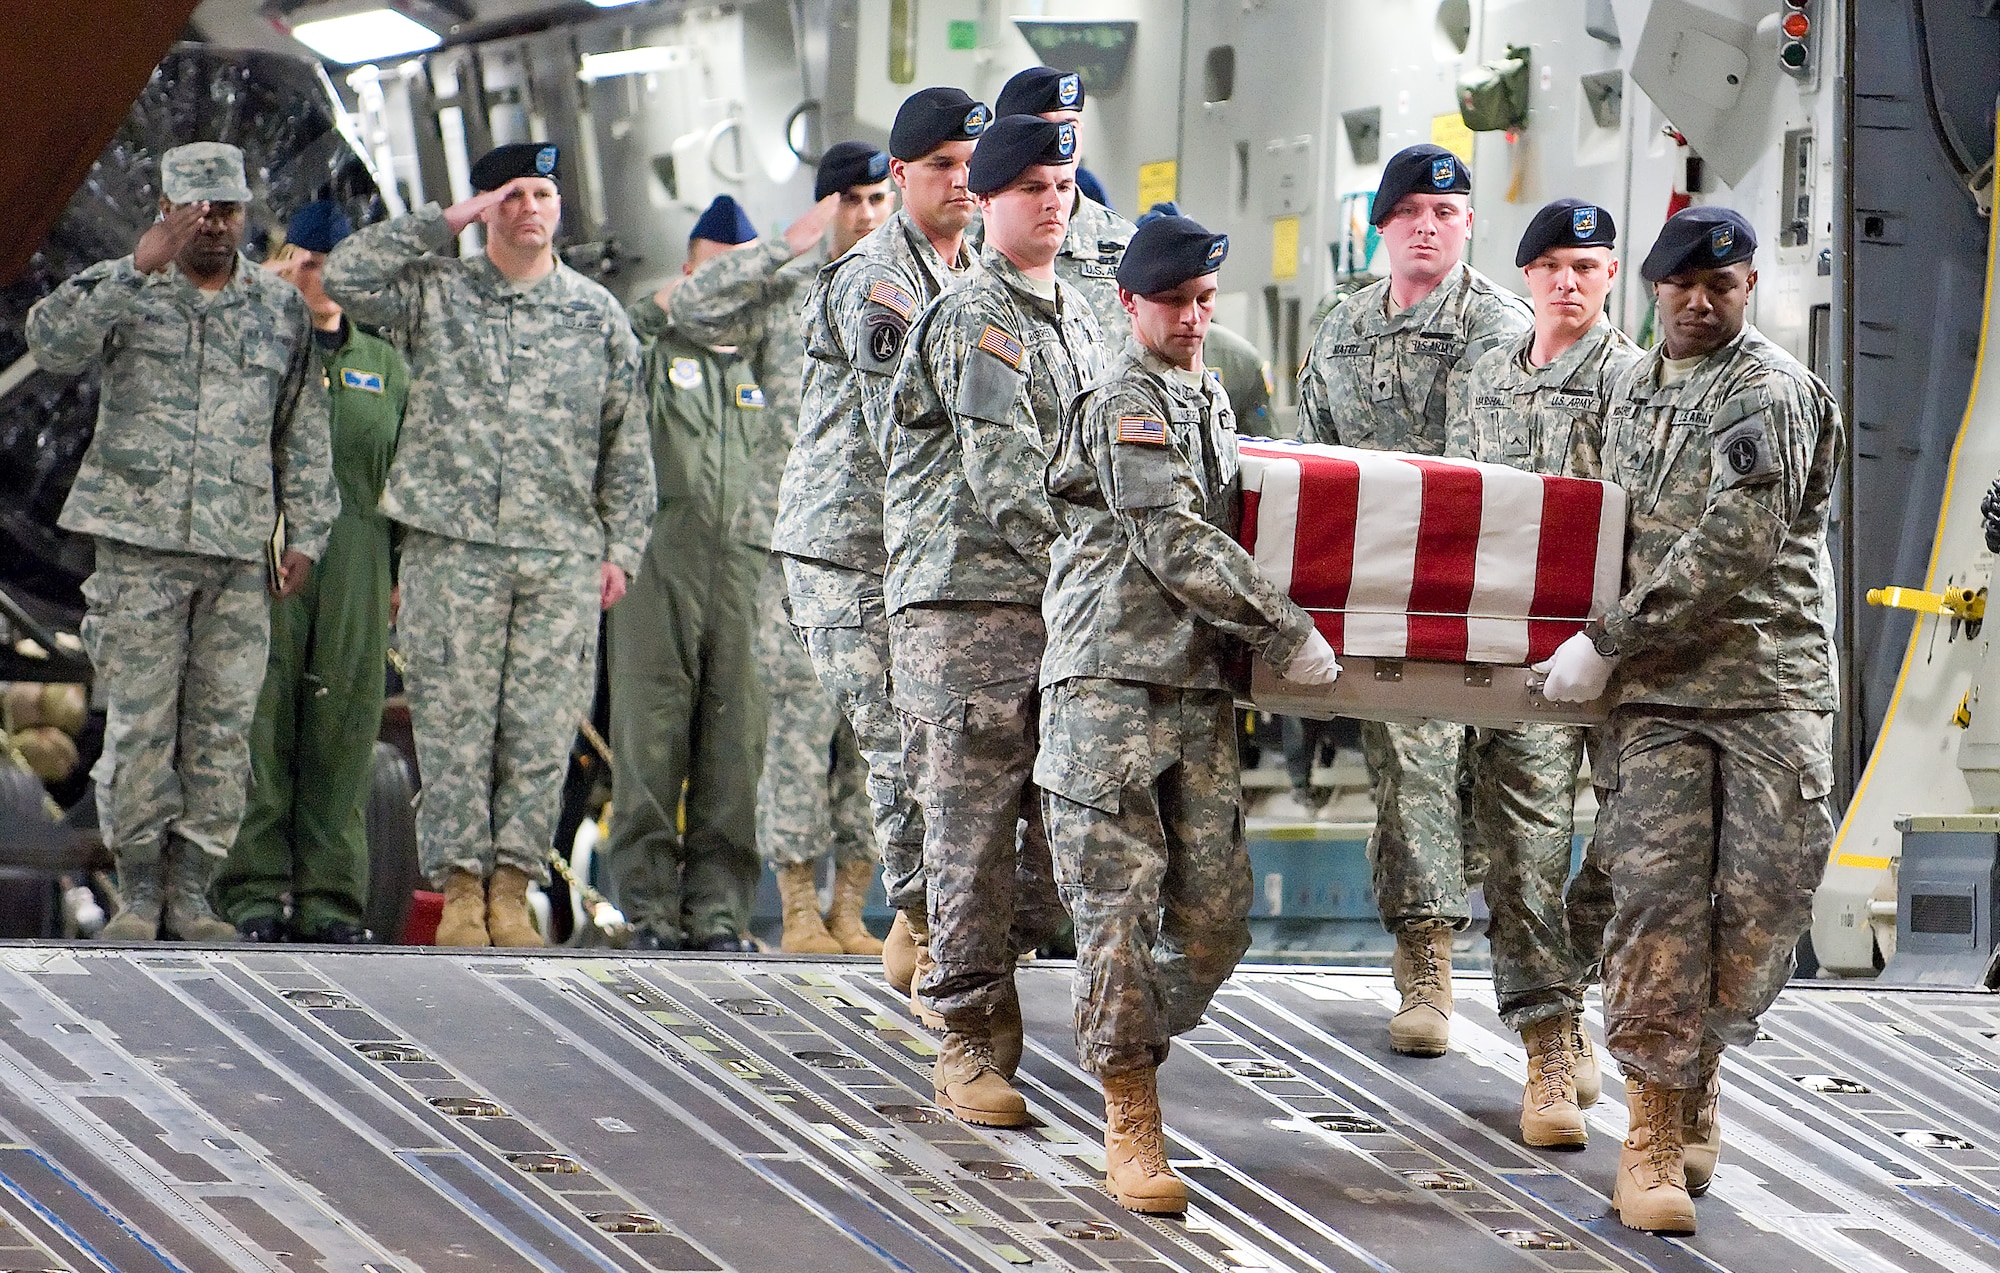 An Army carry team transfers the remains of Army Spc. Israel Candelaria Mejias off from a C-17 Globemaster III April 7 at Dover Air Force Base, Del. Specialist Candelaria Mejias of San Lorenzo, Puerto Rico, died April 5 of wounds sustained when a mine detonated near him during combat operations near Baghdad, Iraq. He was assigned to the 1st Battalion, 2nd Infantry Regiment in Task Force 3rd Battalion, 66th Armor Regiment, 172nd Brigade Combat Team from Grafenwoehr, Germany. The C-17 is assigned to Charleston AFB, S.C. (U.S. Air Force photo/Roland Balik) 
